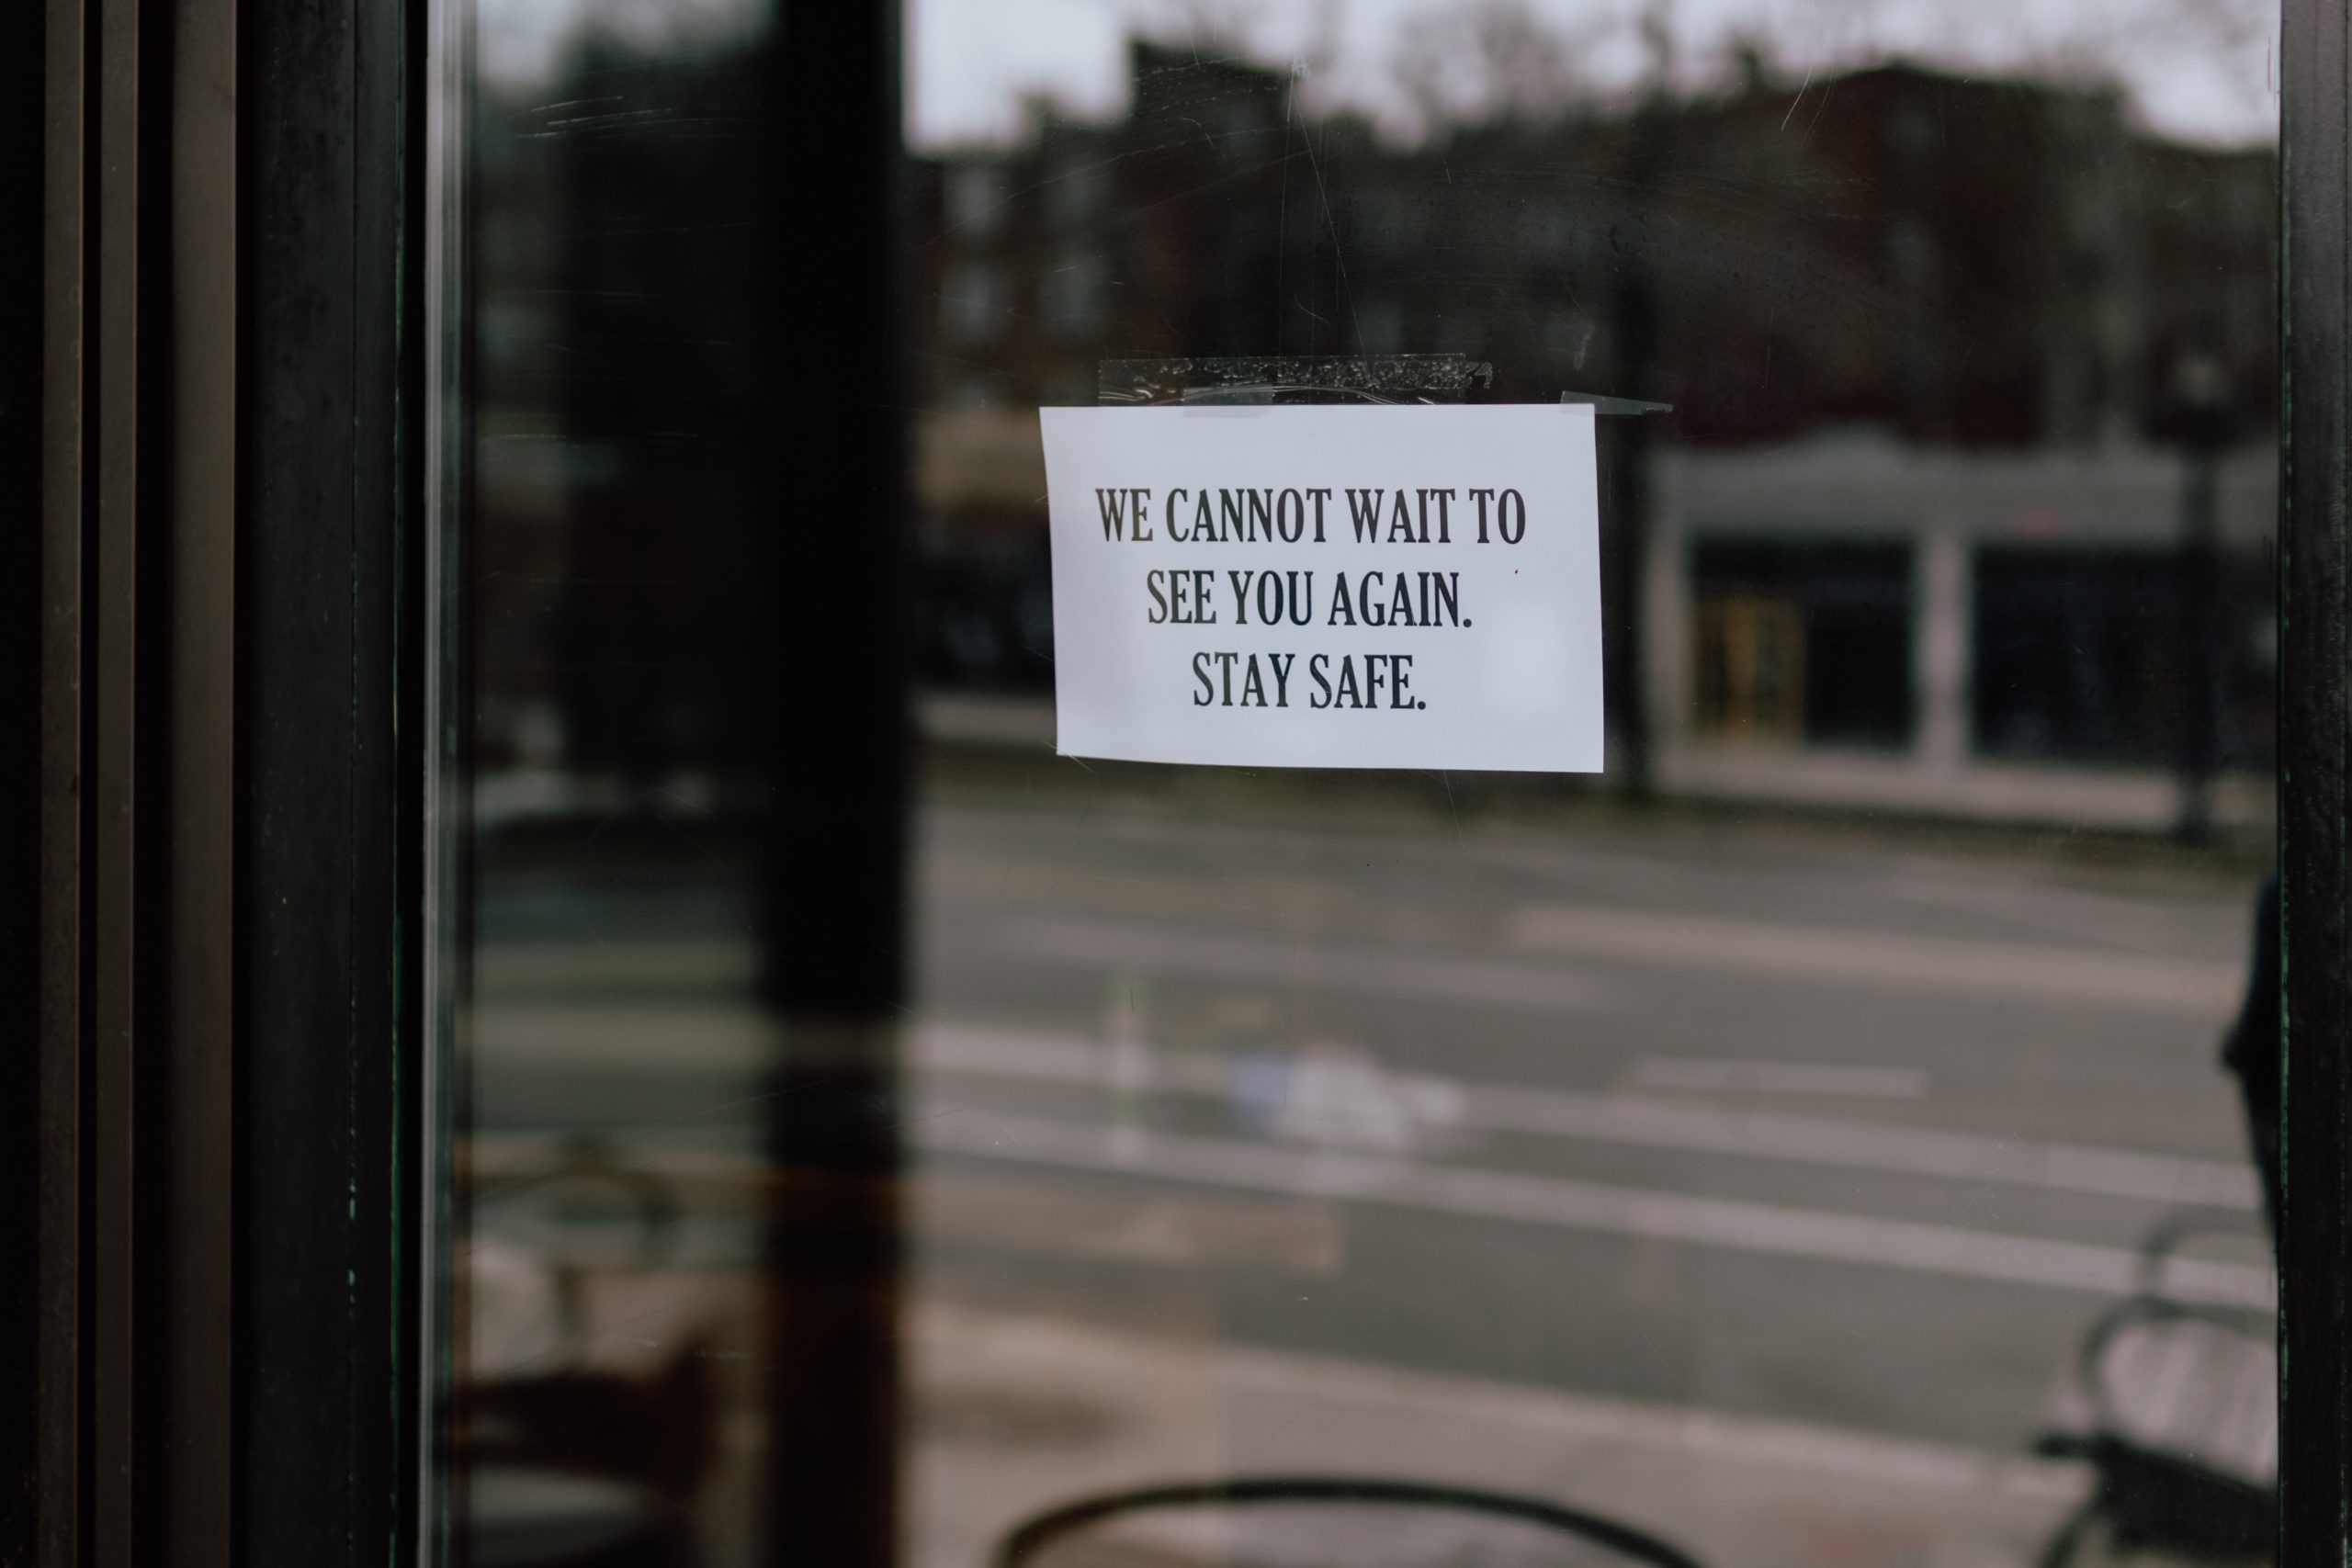 A business window displays a sign that says “We cannot wait to see you again. Stay safe